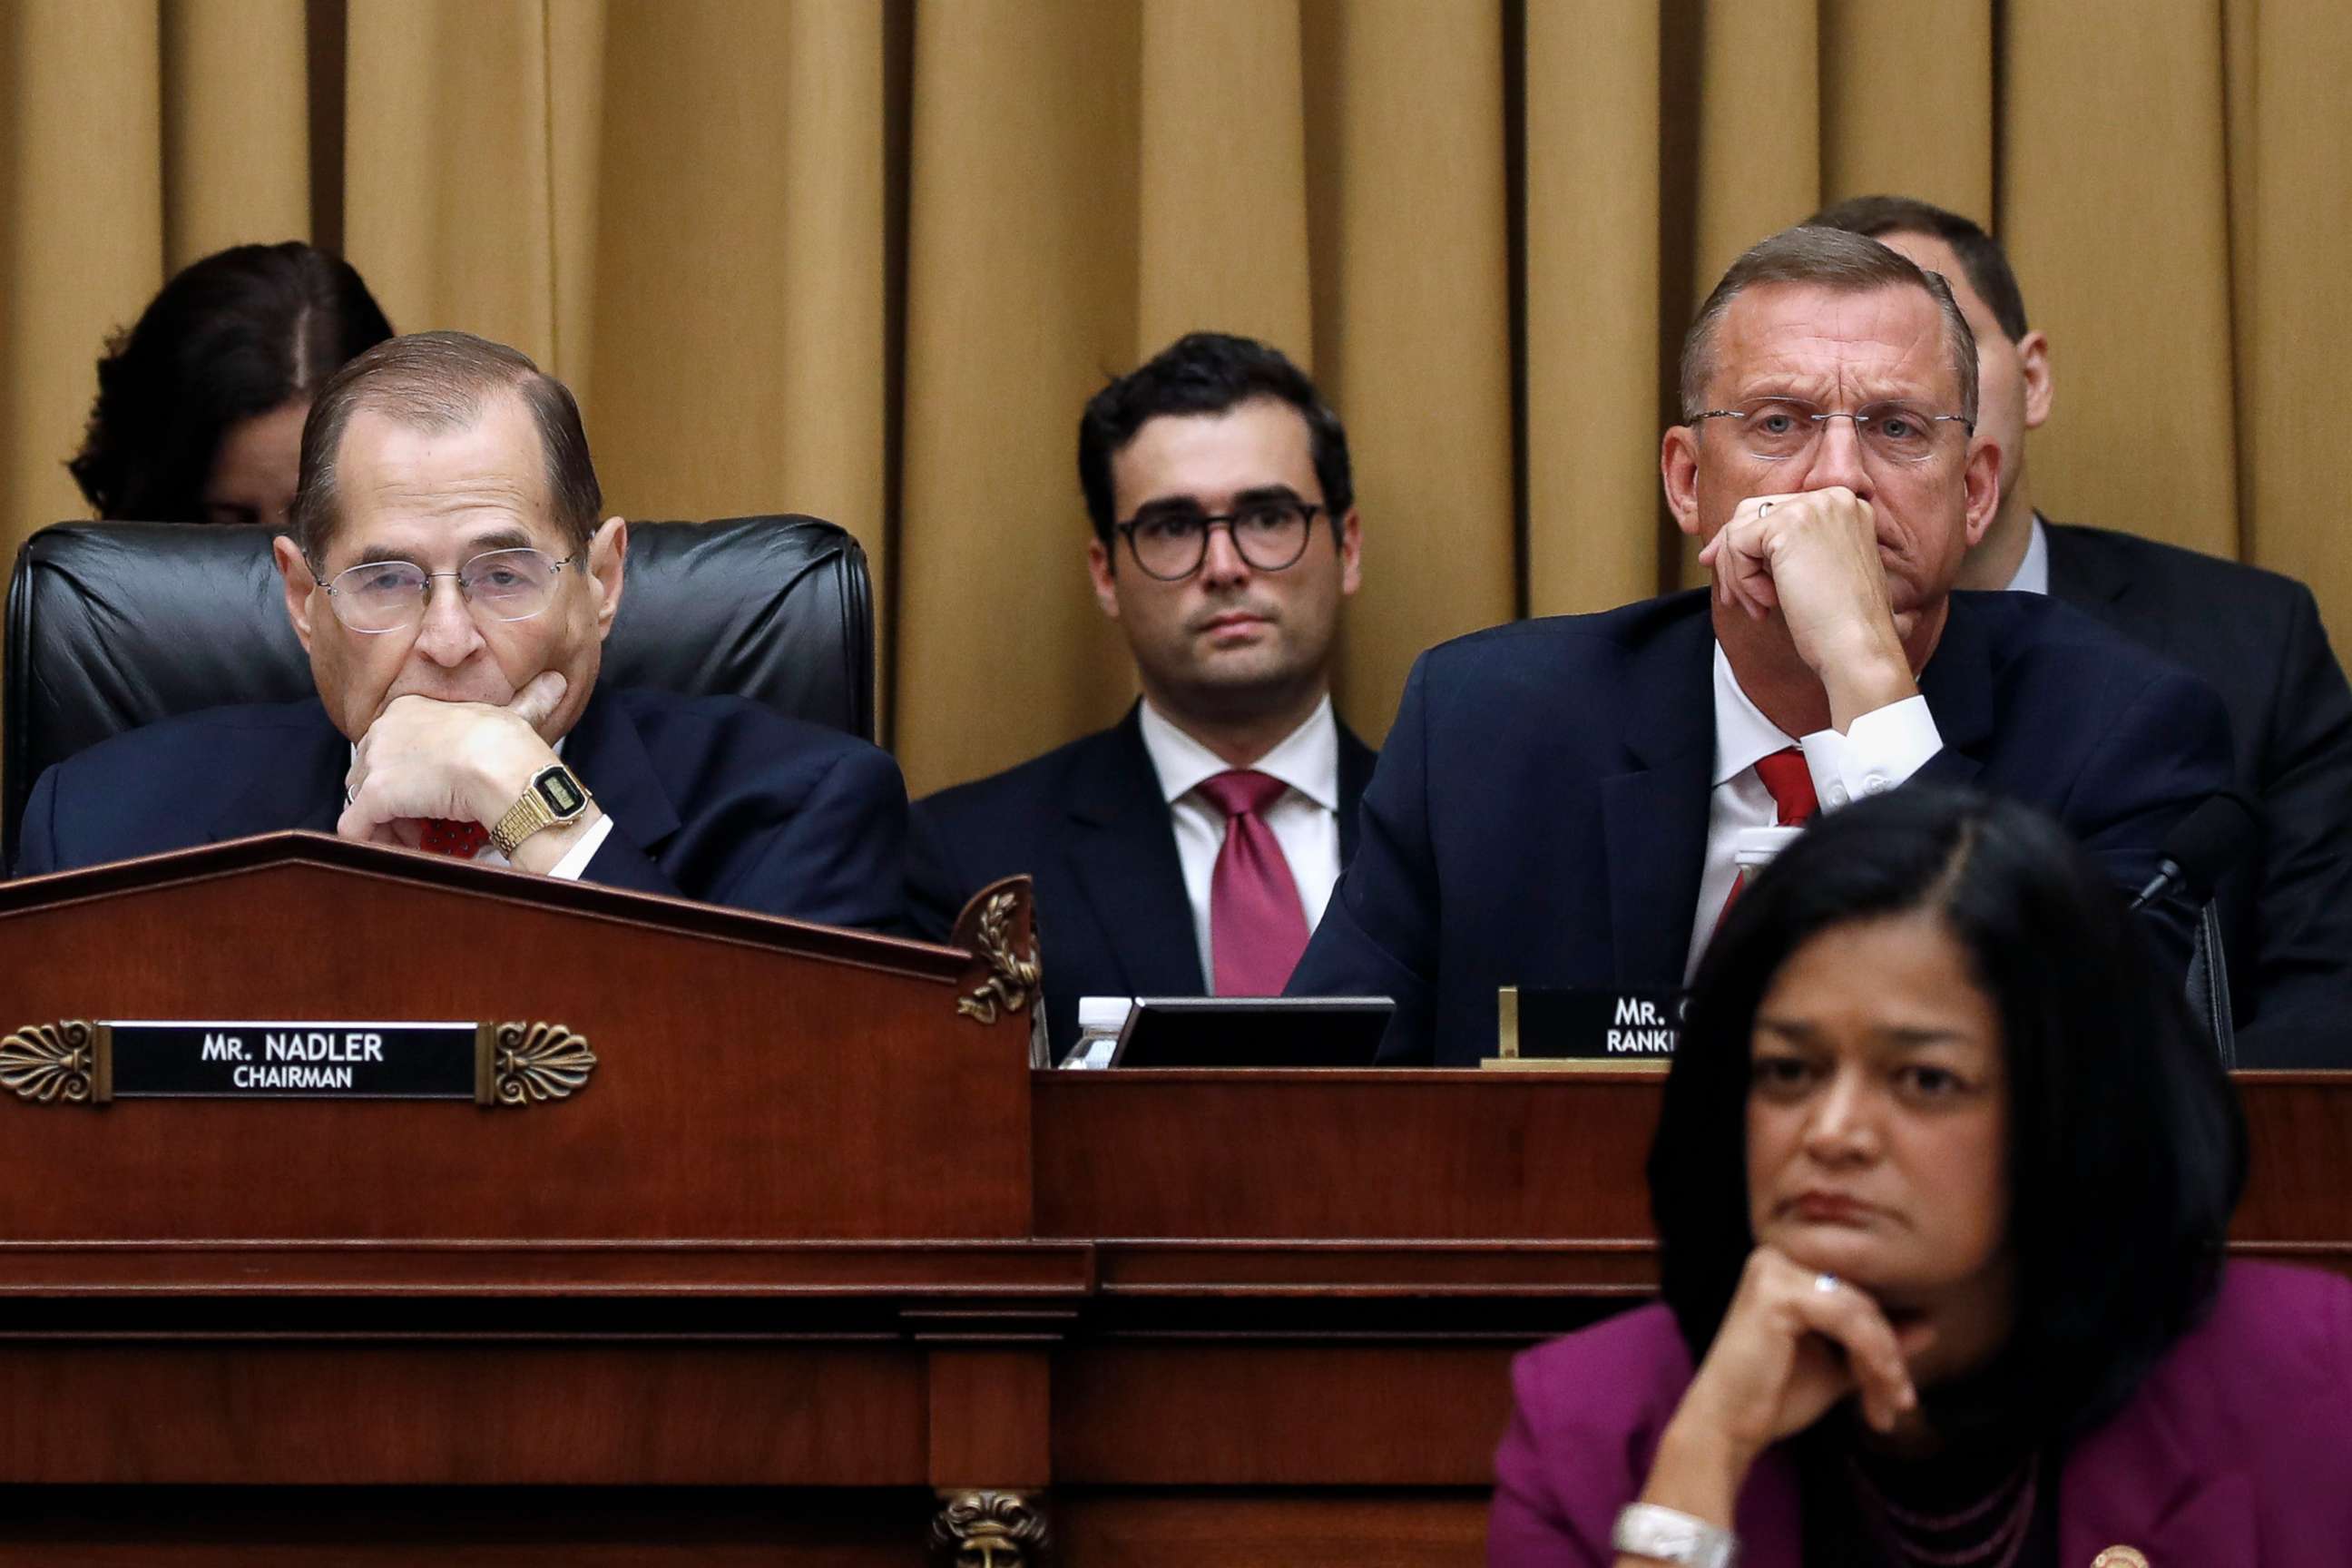 PHOTO: House Judiciary Committee Chairman Jerrold Nadler, left, Rep. Doug Collins, top right, and Rep. Pramila Jayapal, bottom right, listen as former special counsel Robert Mueller testifies, July 24, 2019, in Washington, D.C.